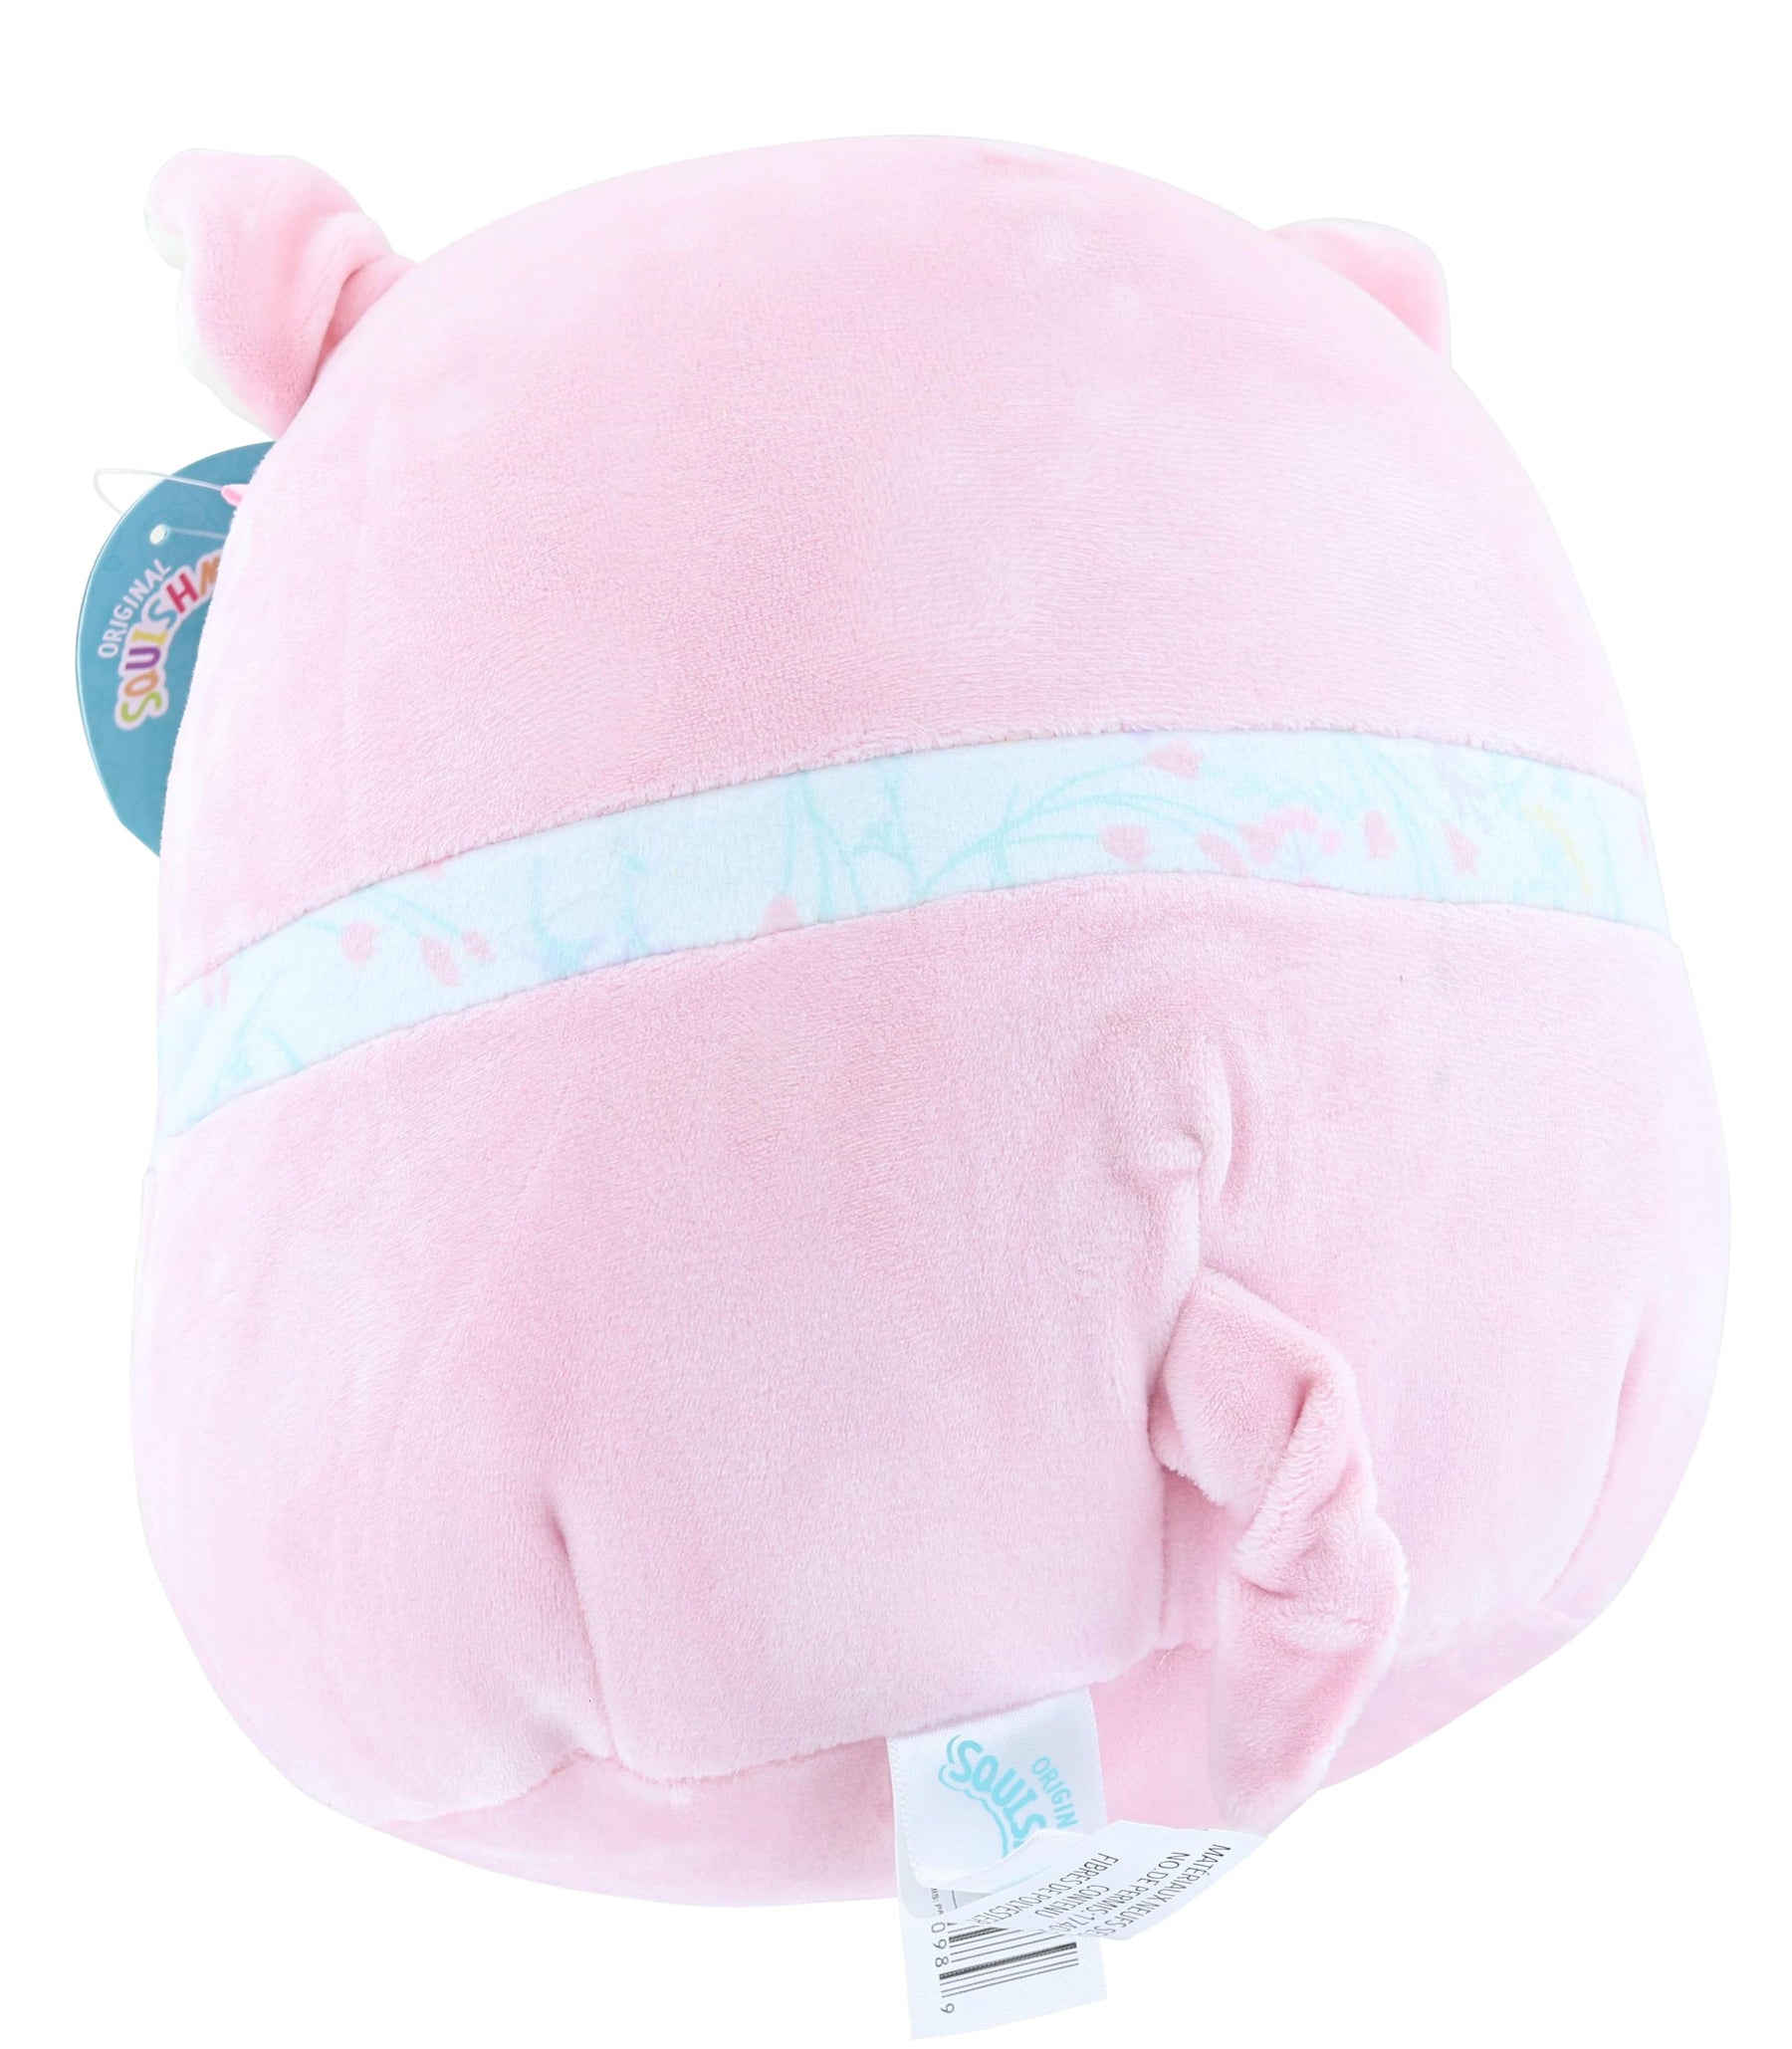 Squishmallow 8 Inch Plush | Hettie the Pig with Scarf